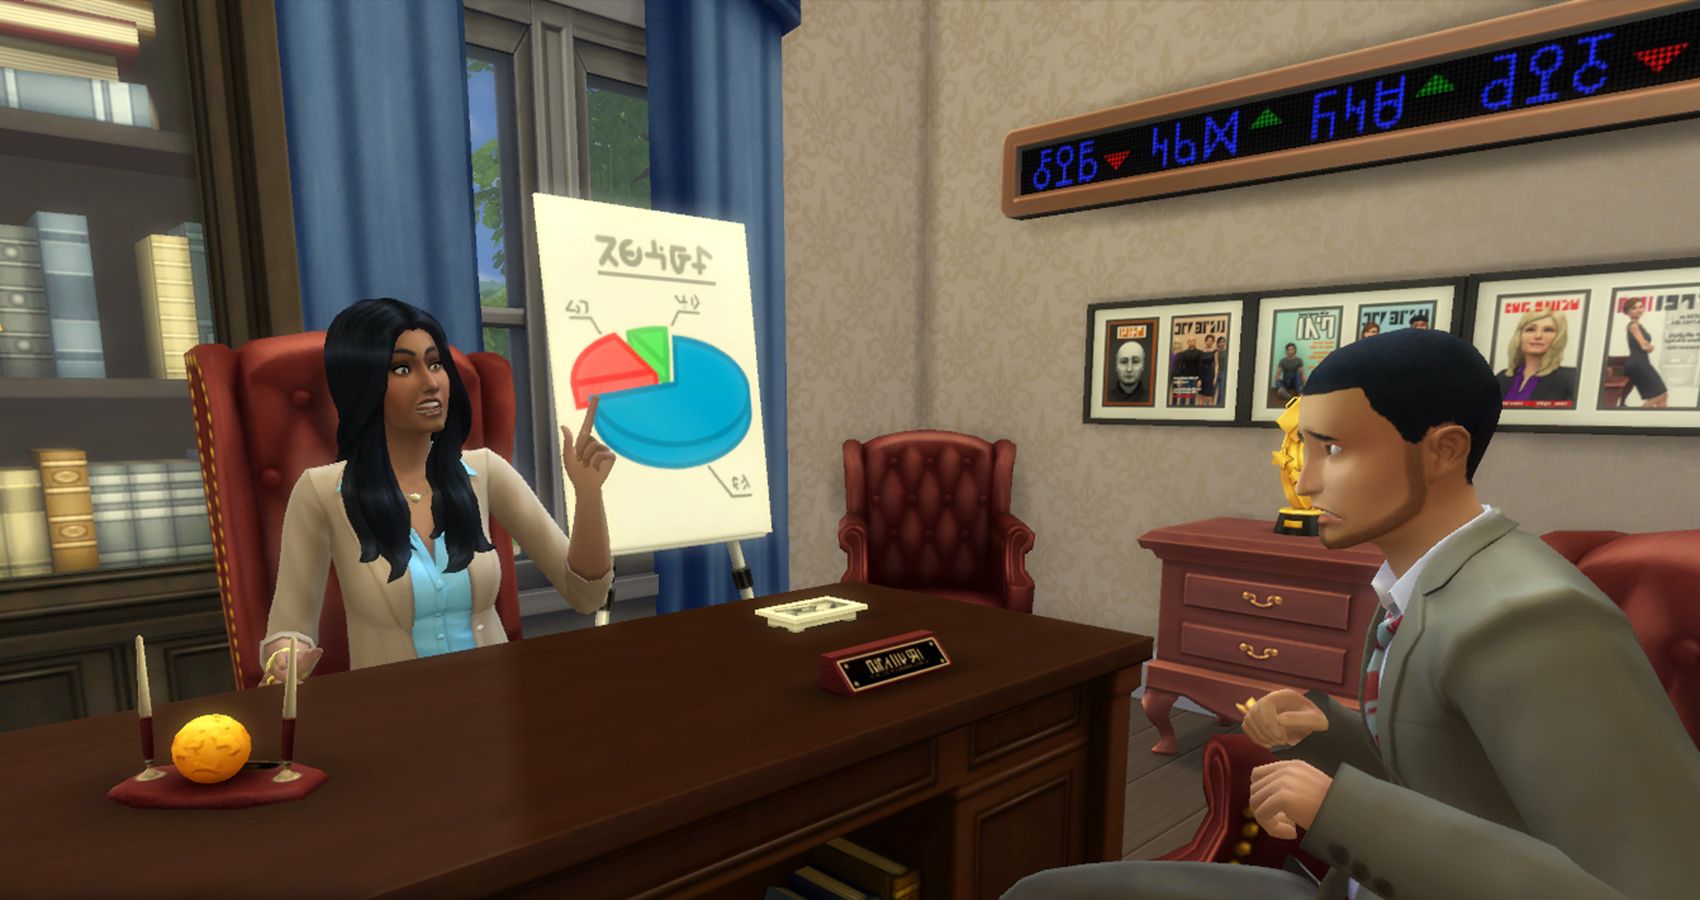 The Sims 4: How To Fill Out Reports